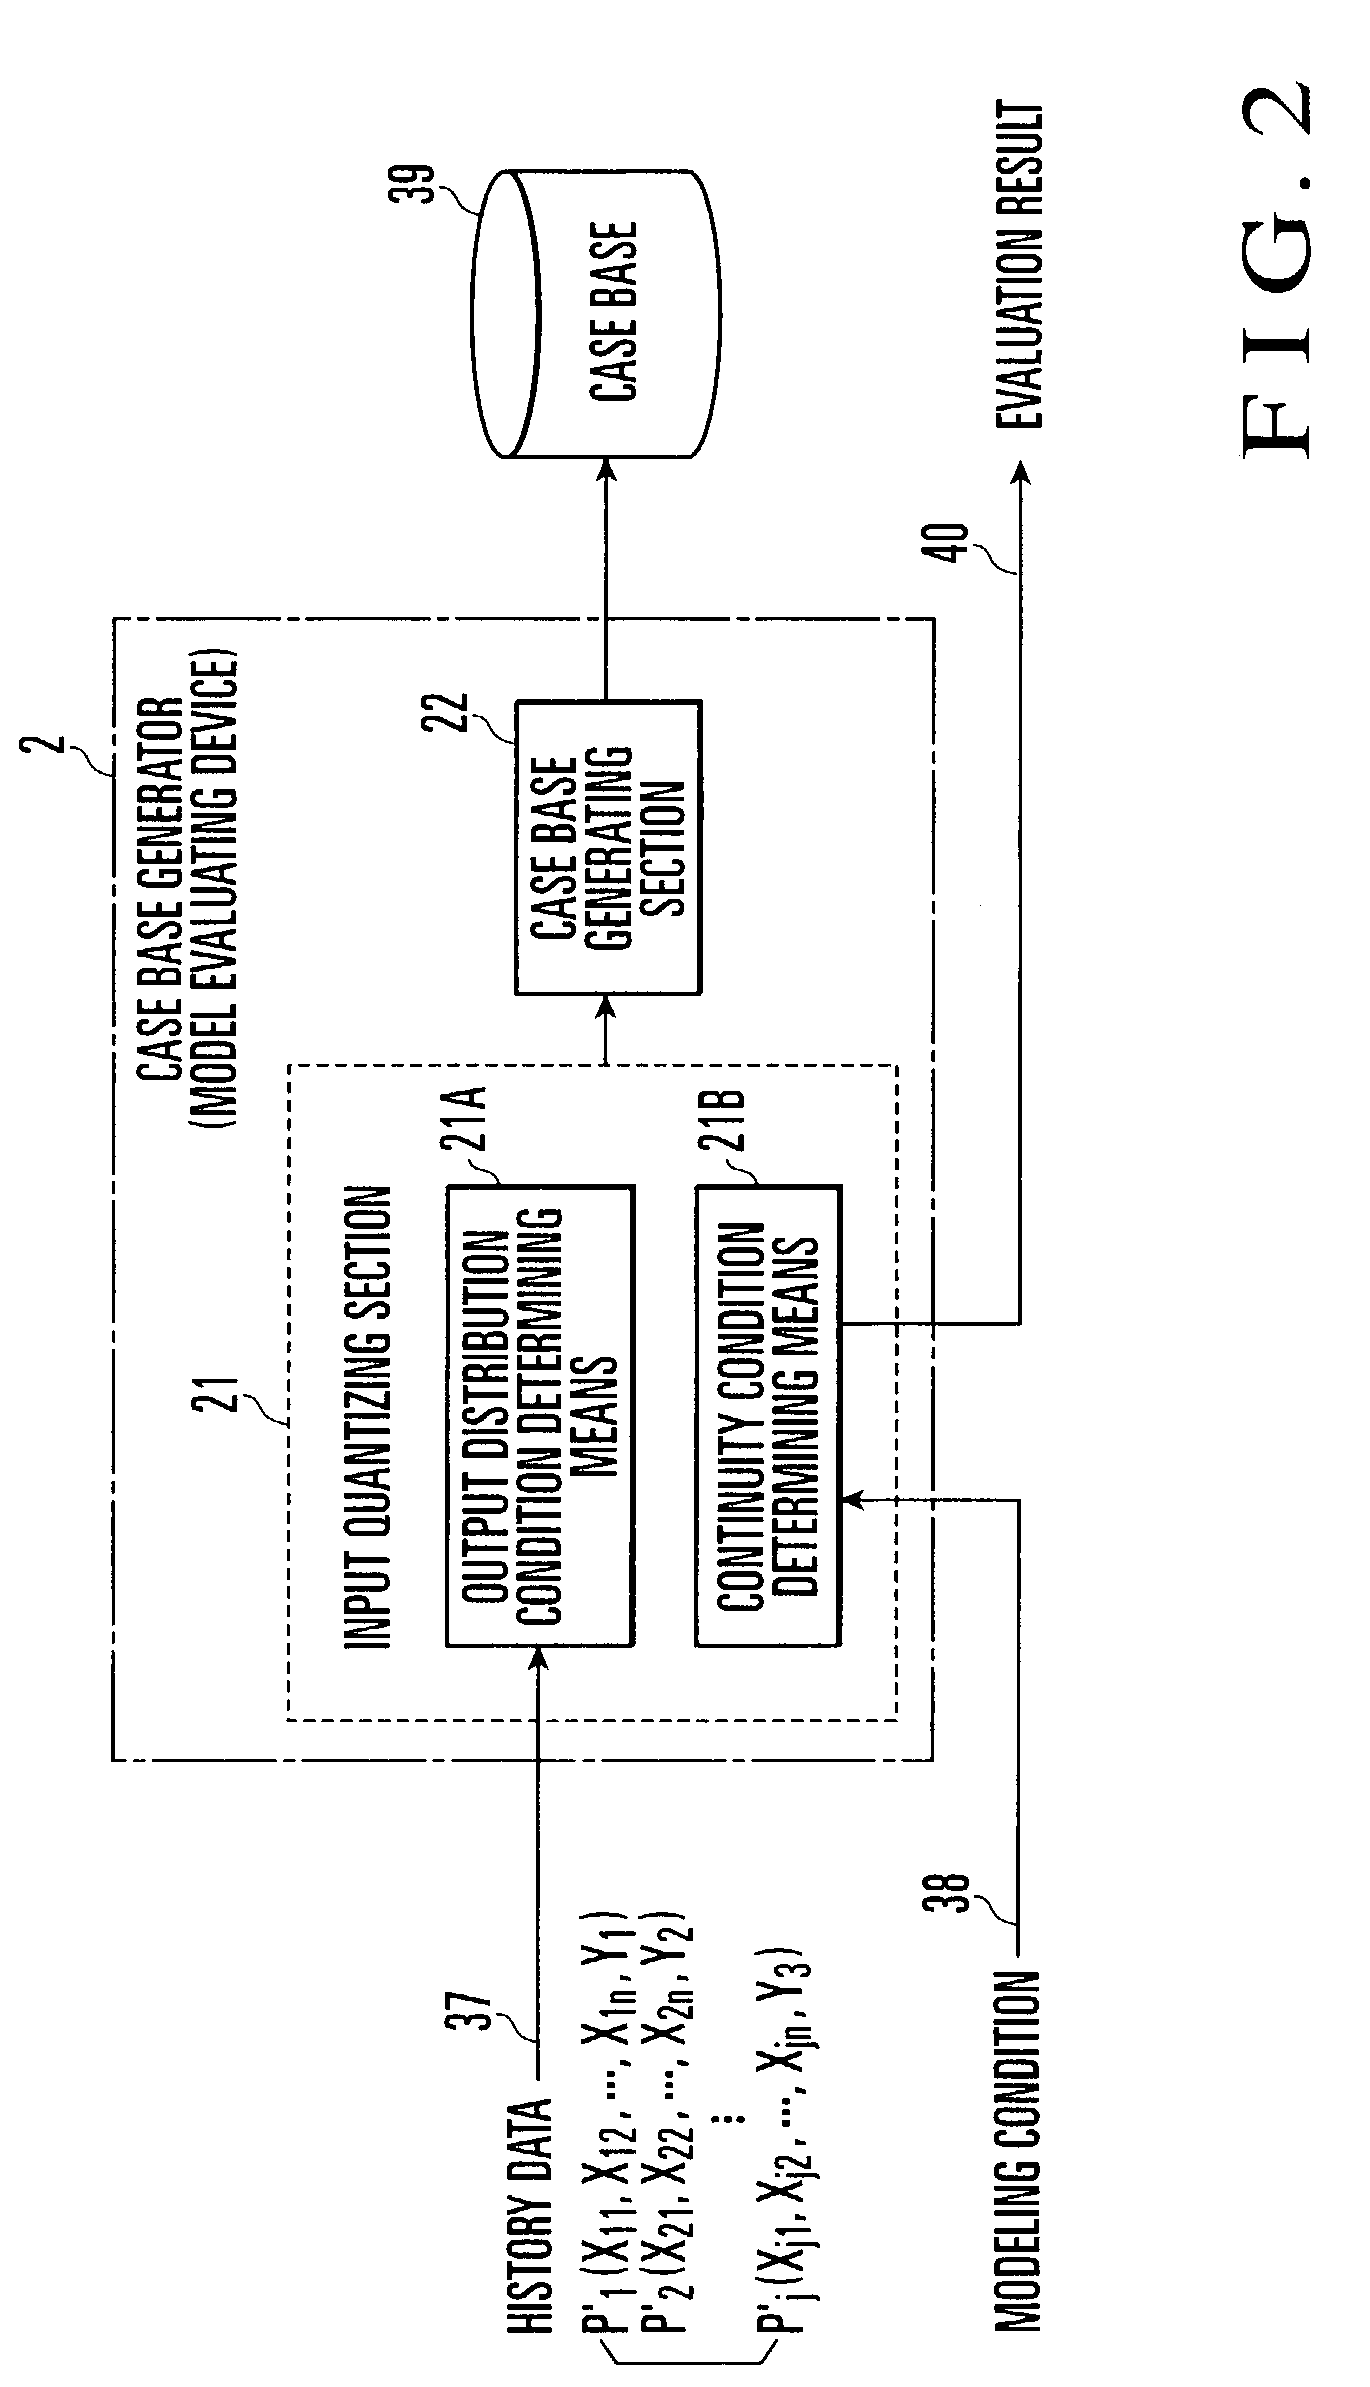 Soft sensor device and device for evaluating the same